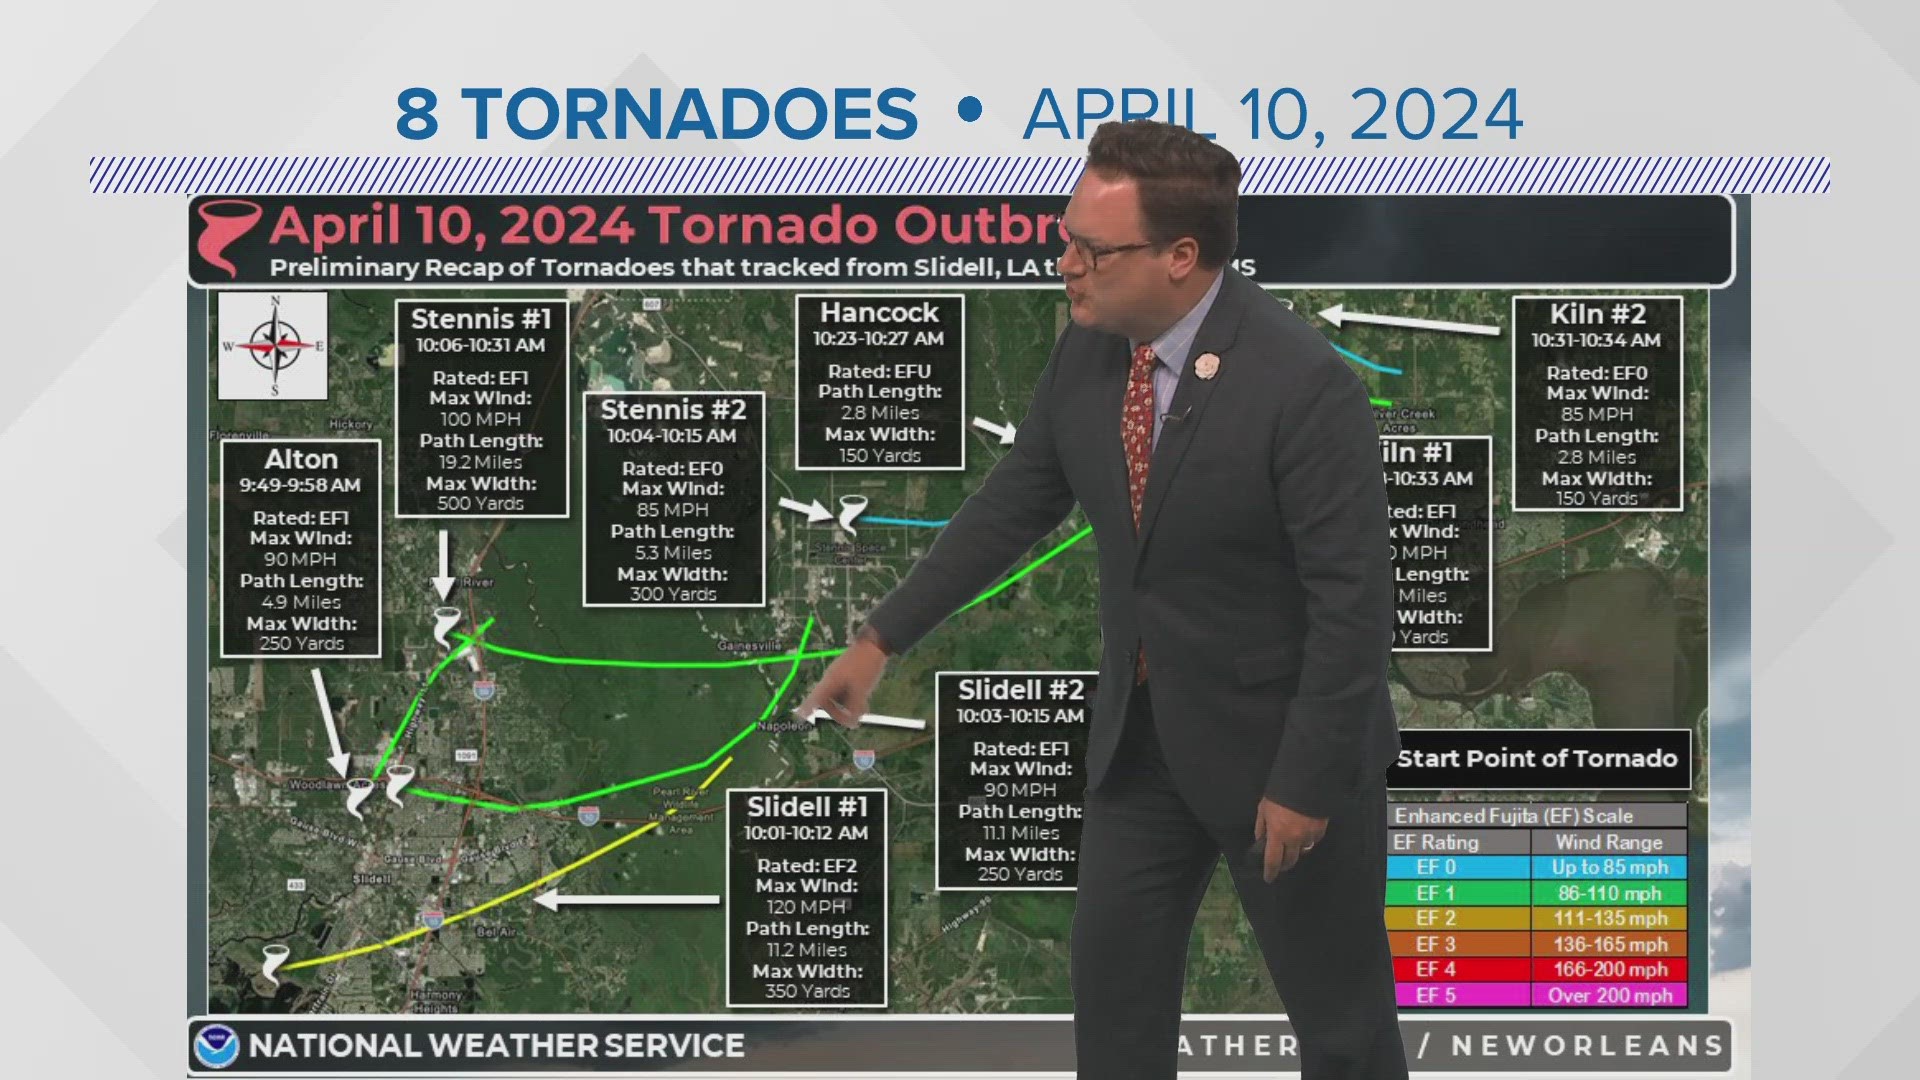 In a tweet, NWS said, "After tedious satellite analysis, we have confirmed that a total of 8 tornadoes tracked from Slidell, LA through Kiln, MS."